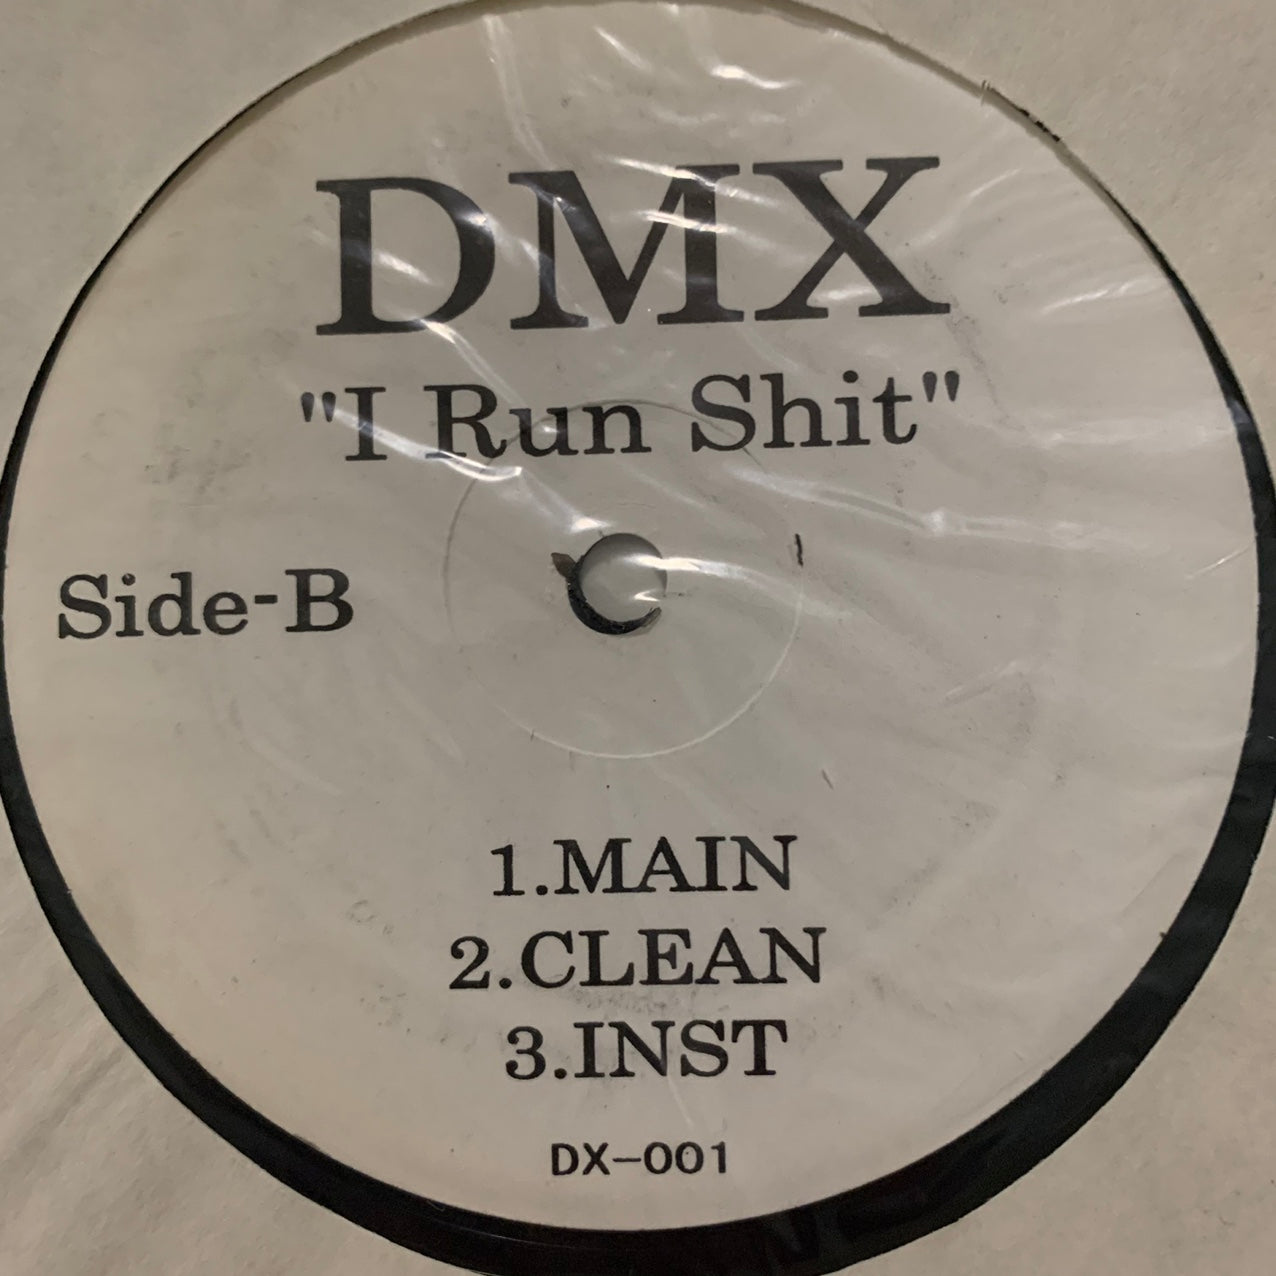 DMX Feat Eve “Walk These Dogs” 12 Inch Vinyl